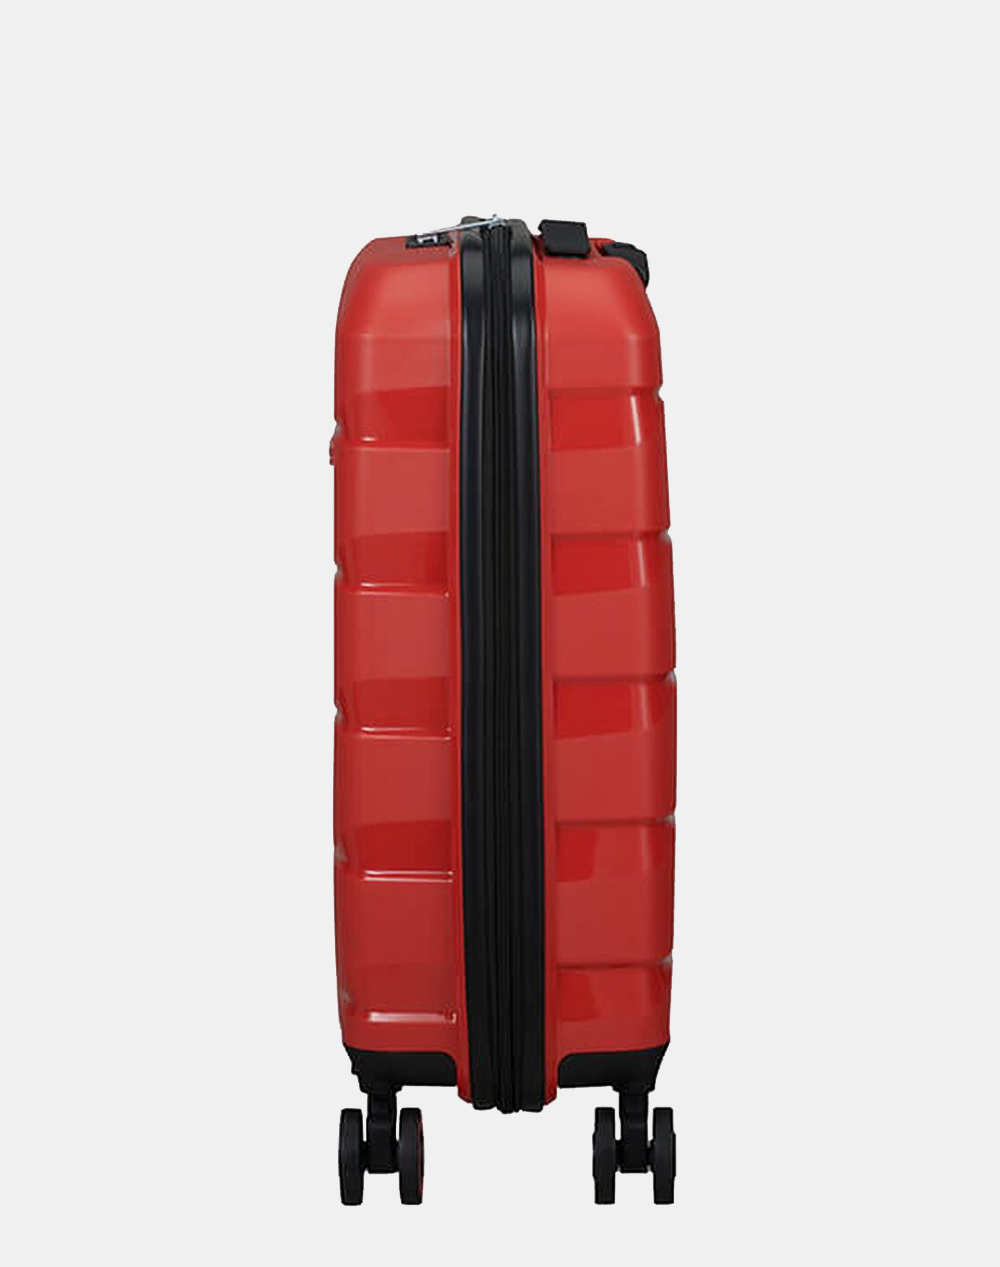 American Tourister Trolley Bag Cabin Size Hotsell - www.edoc.com.vn  1693505092